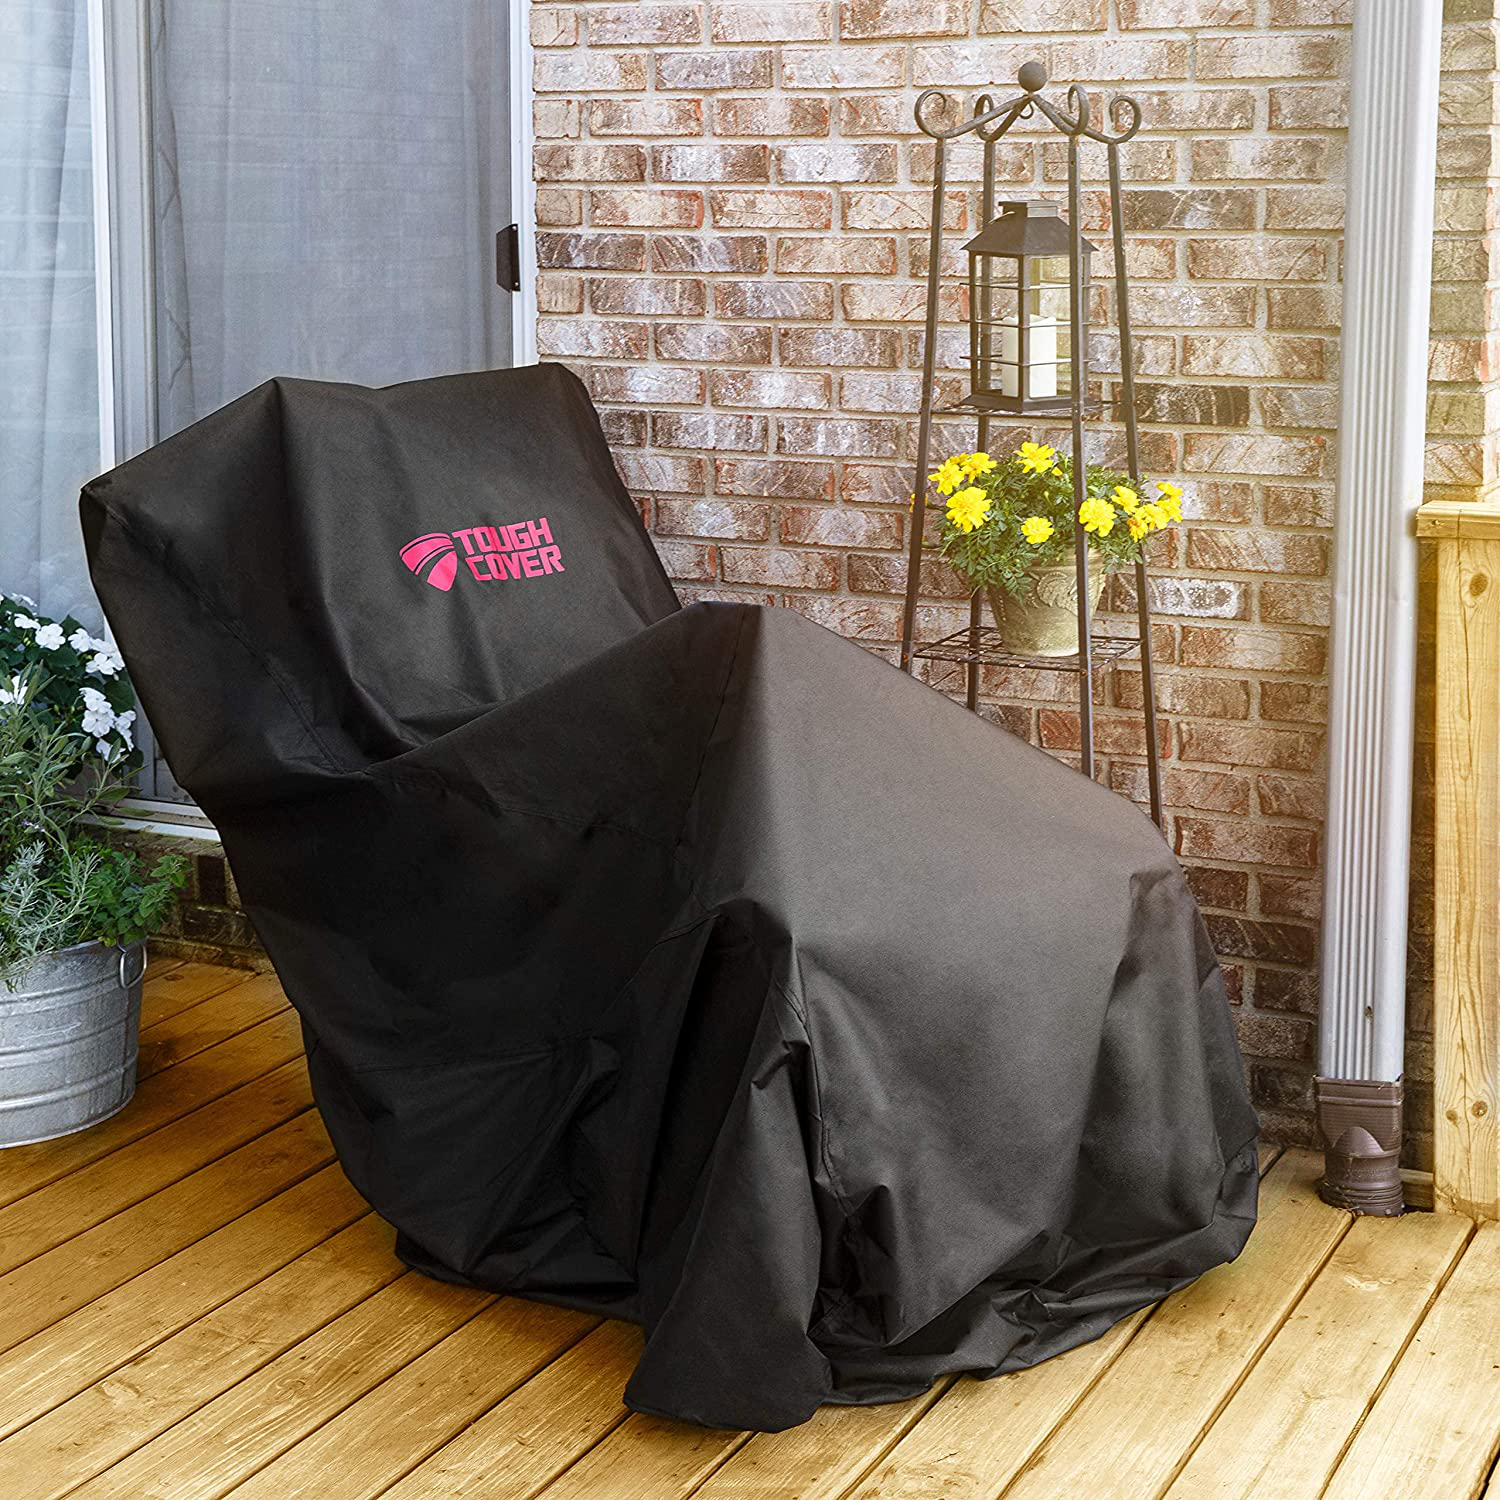 Tough Cover Premium Two-Stage Snow Thrower Cover. Heavy Duty 600D Marine Grade Fabric. Universal Fit. Weather, UV Protection.